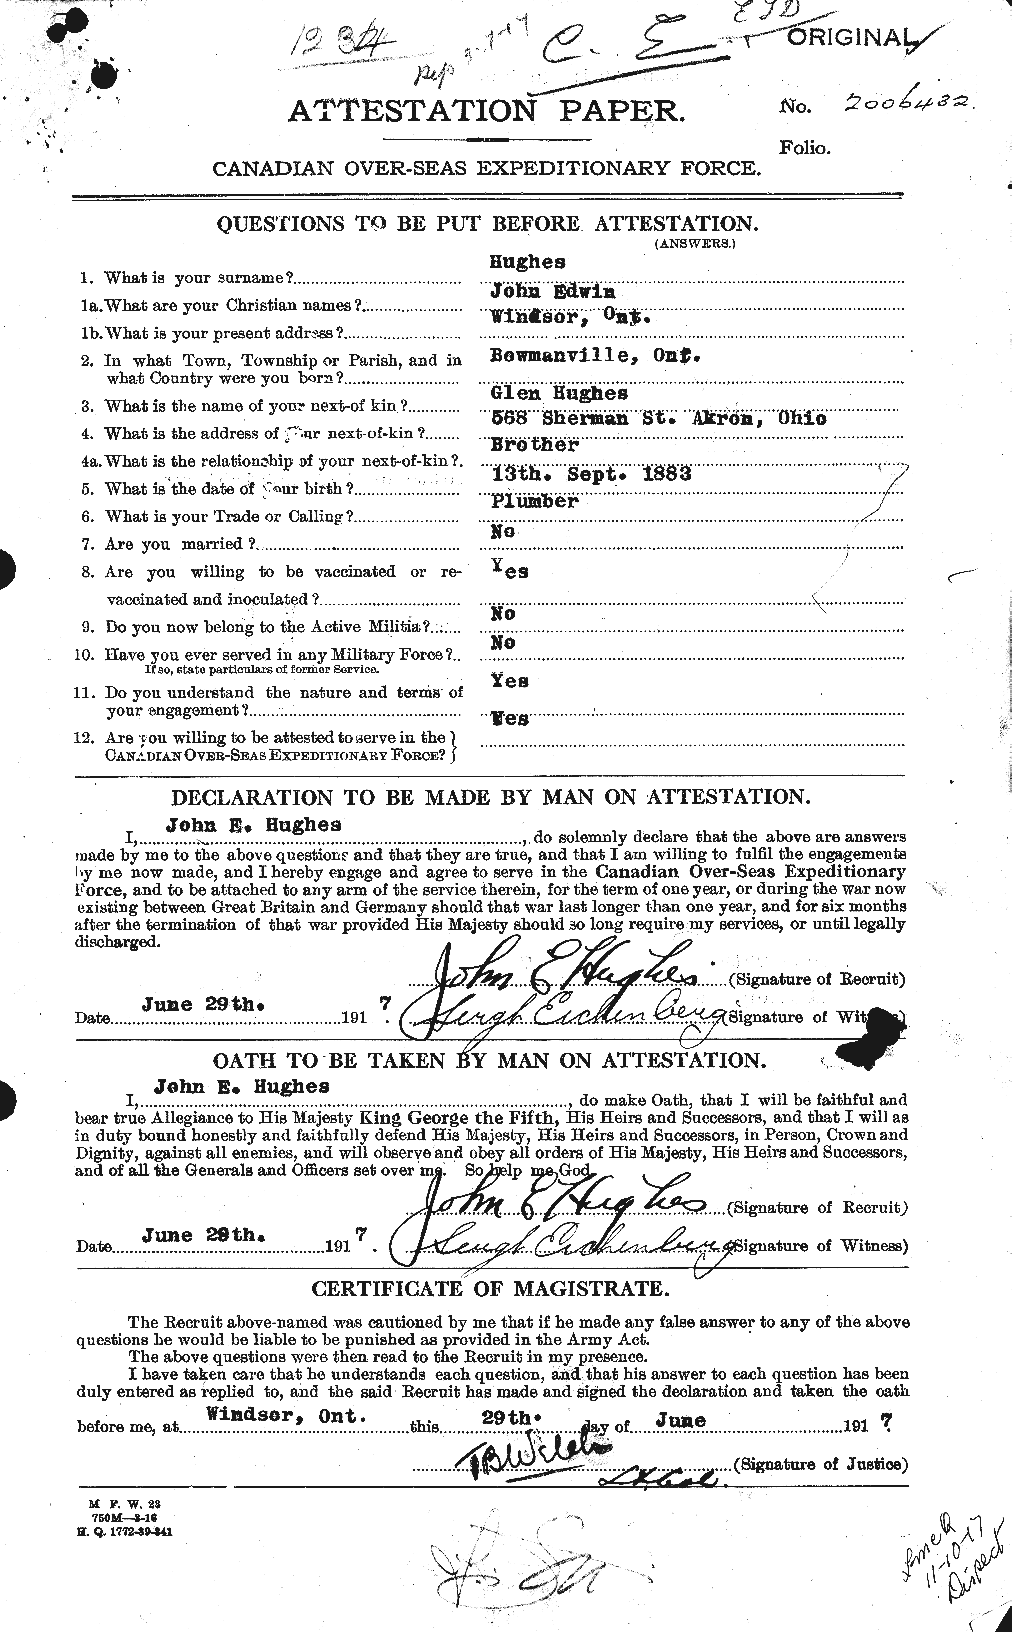 Personnel Records of the First World War - CEF 404013a